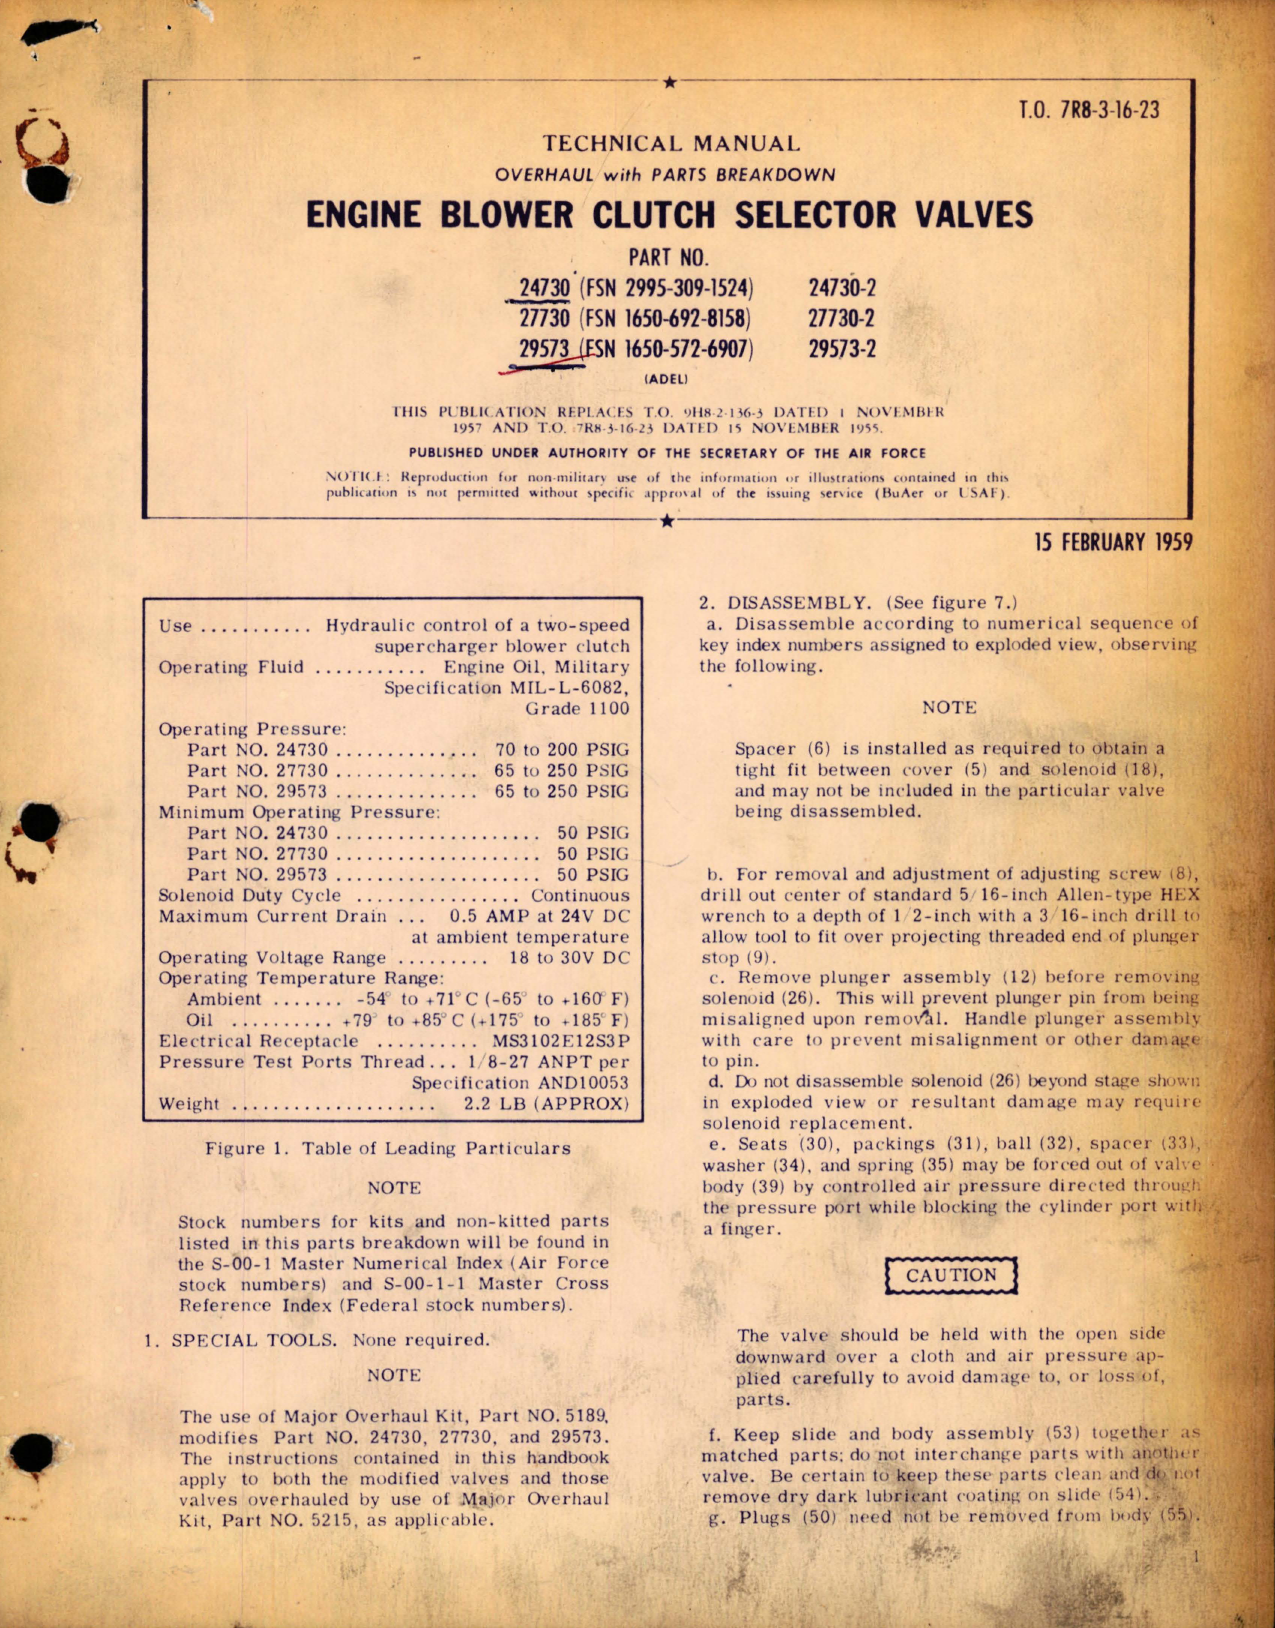 Sample page 1 from AirCorps Library document: Overhaul with Parts Breakdown for Engine Blower Clutch Selector Valves - Parts 24730, 27730, and 29573 